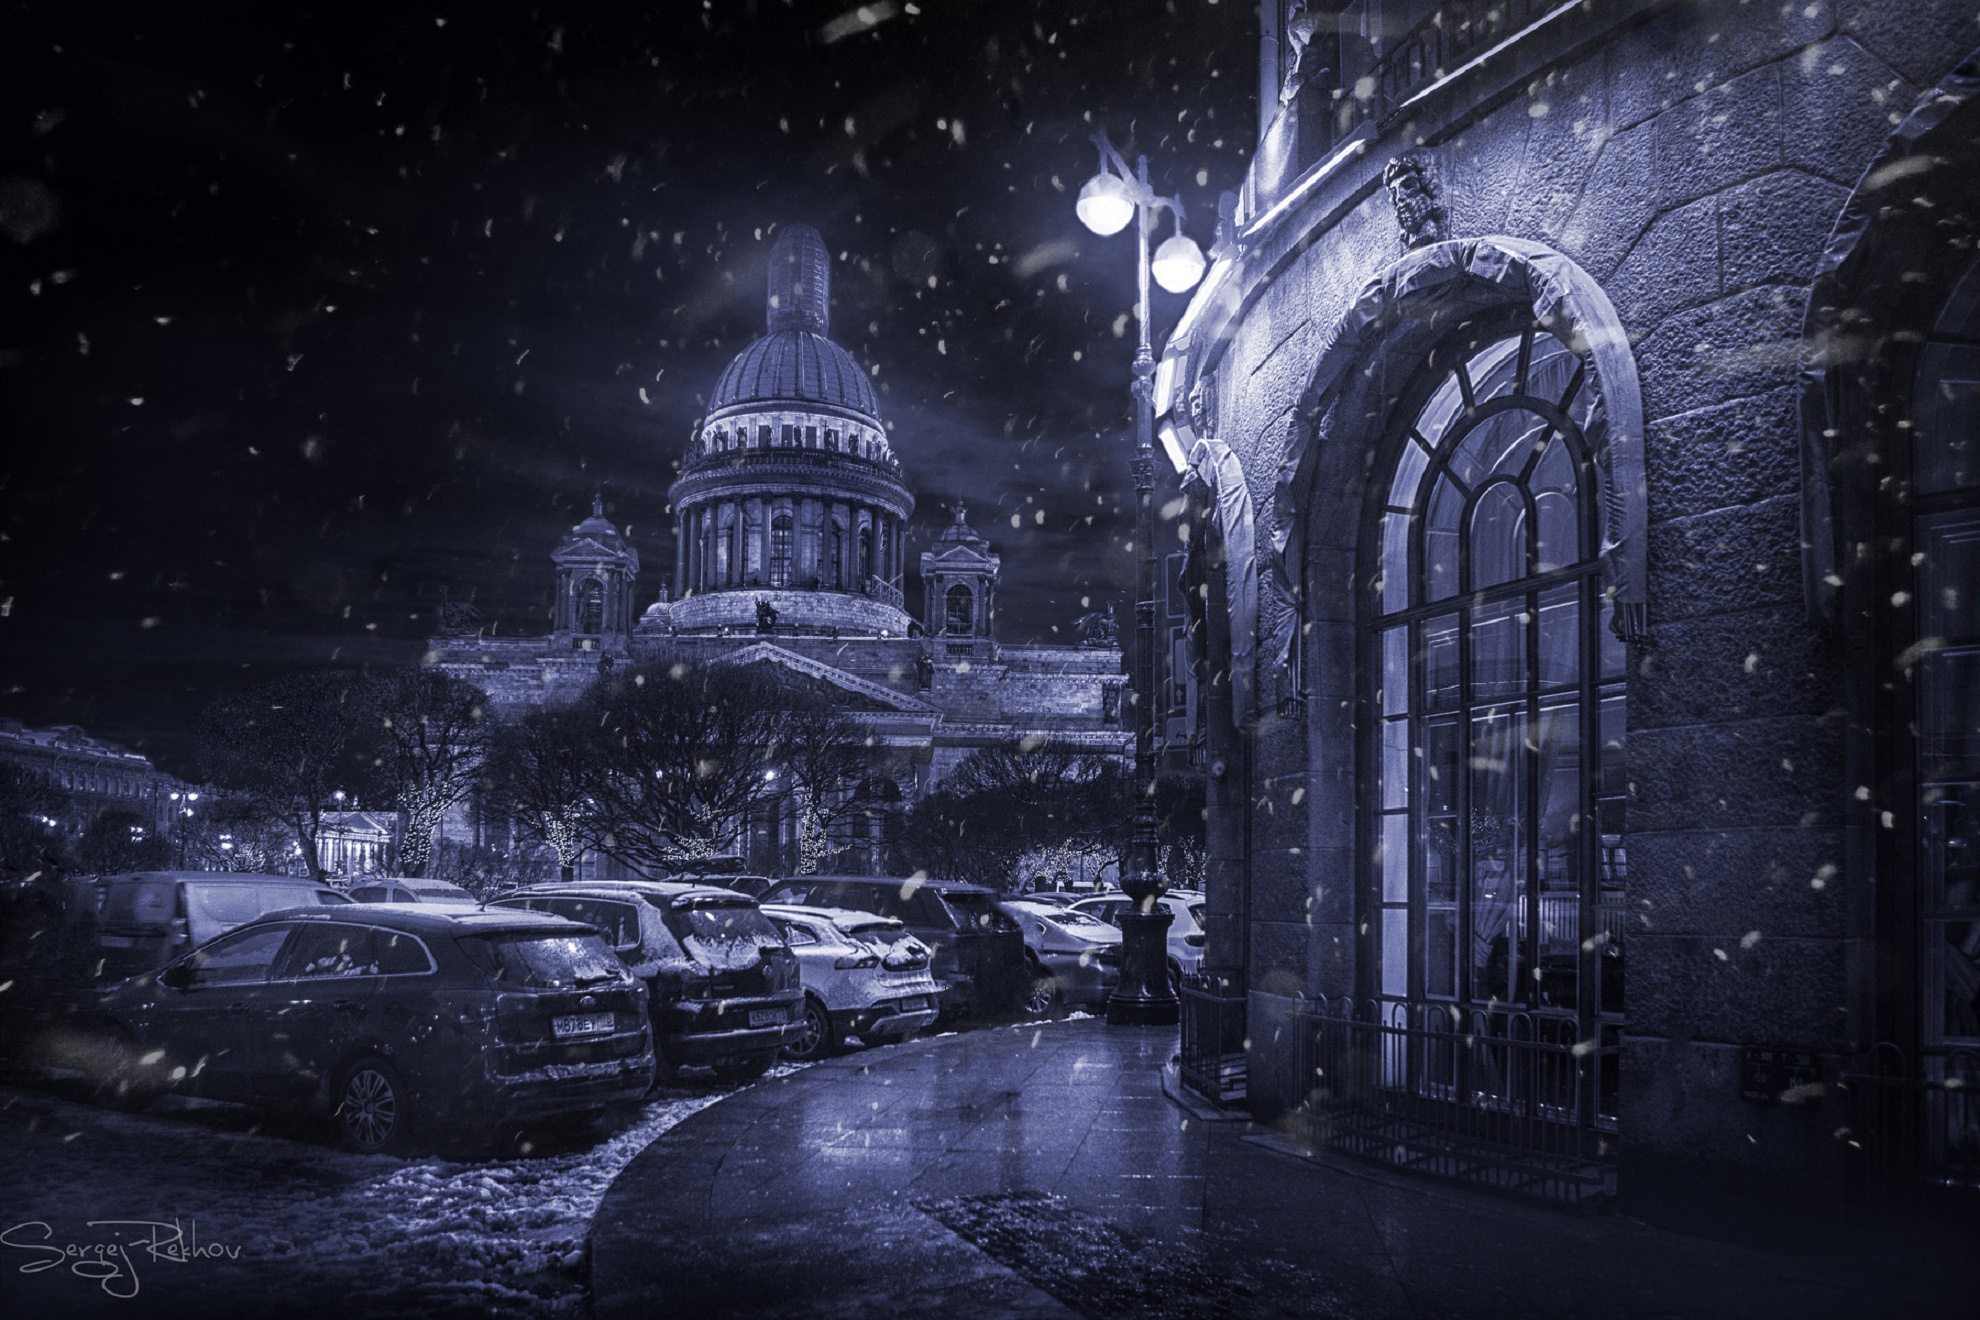 Isaakievsky cathedral by Rehov Sergey